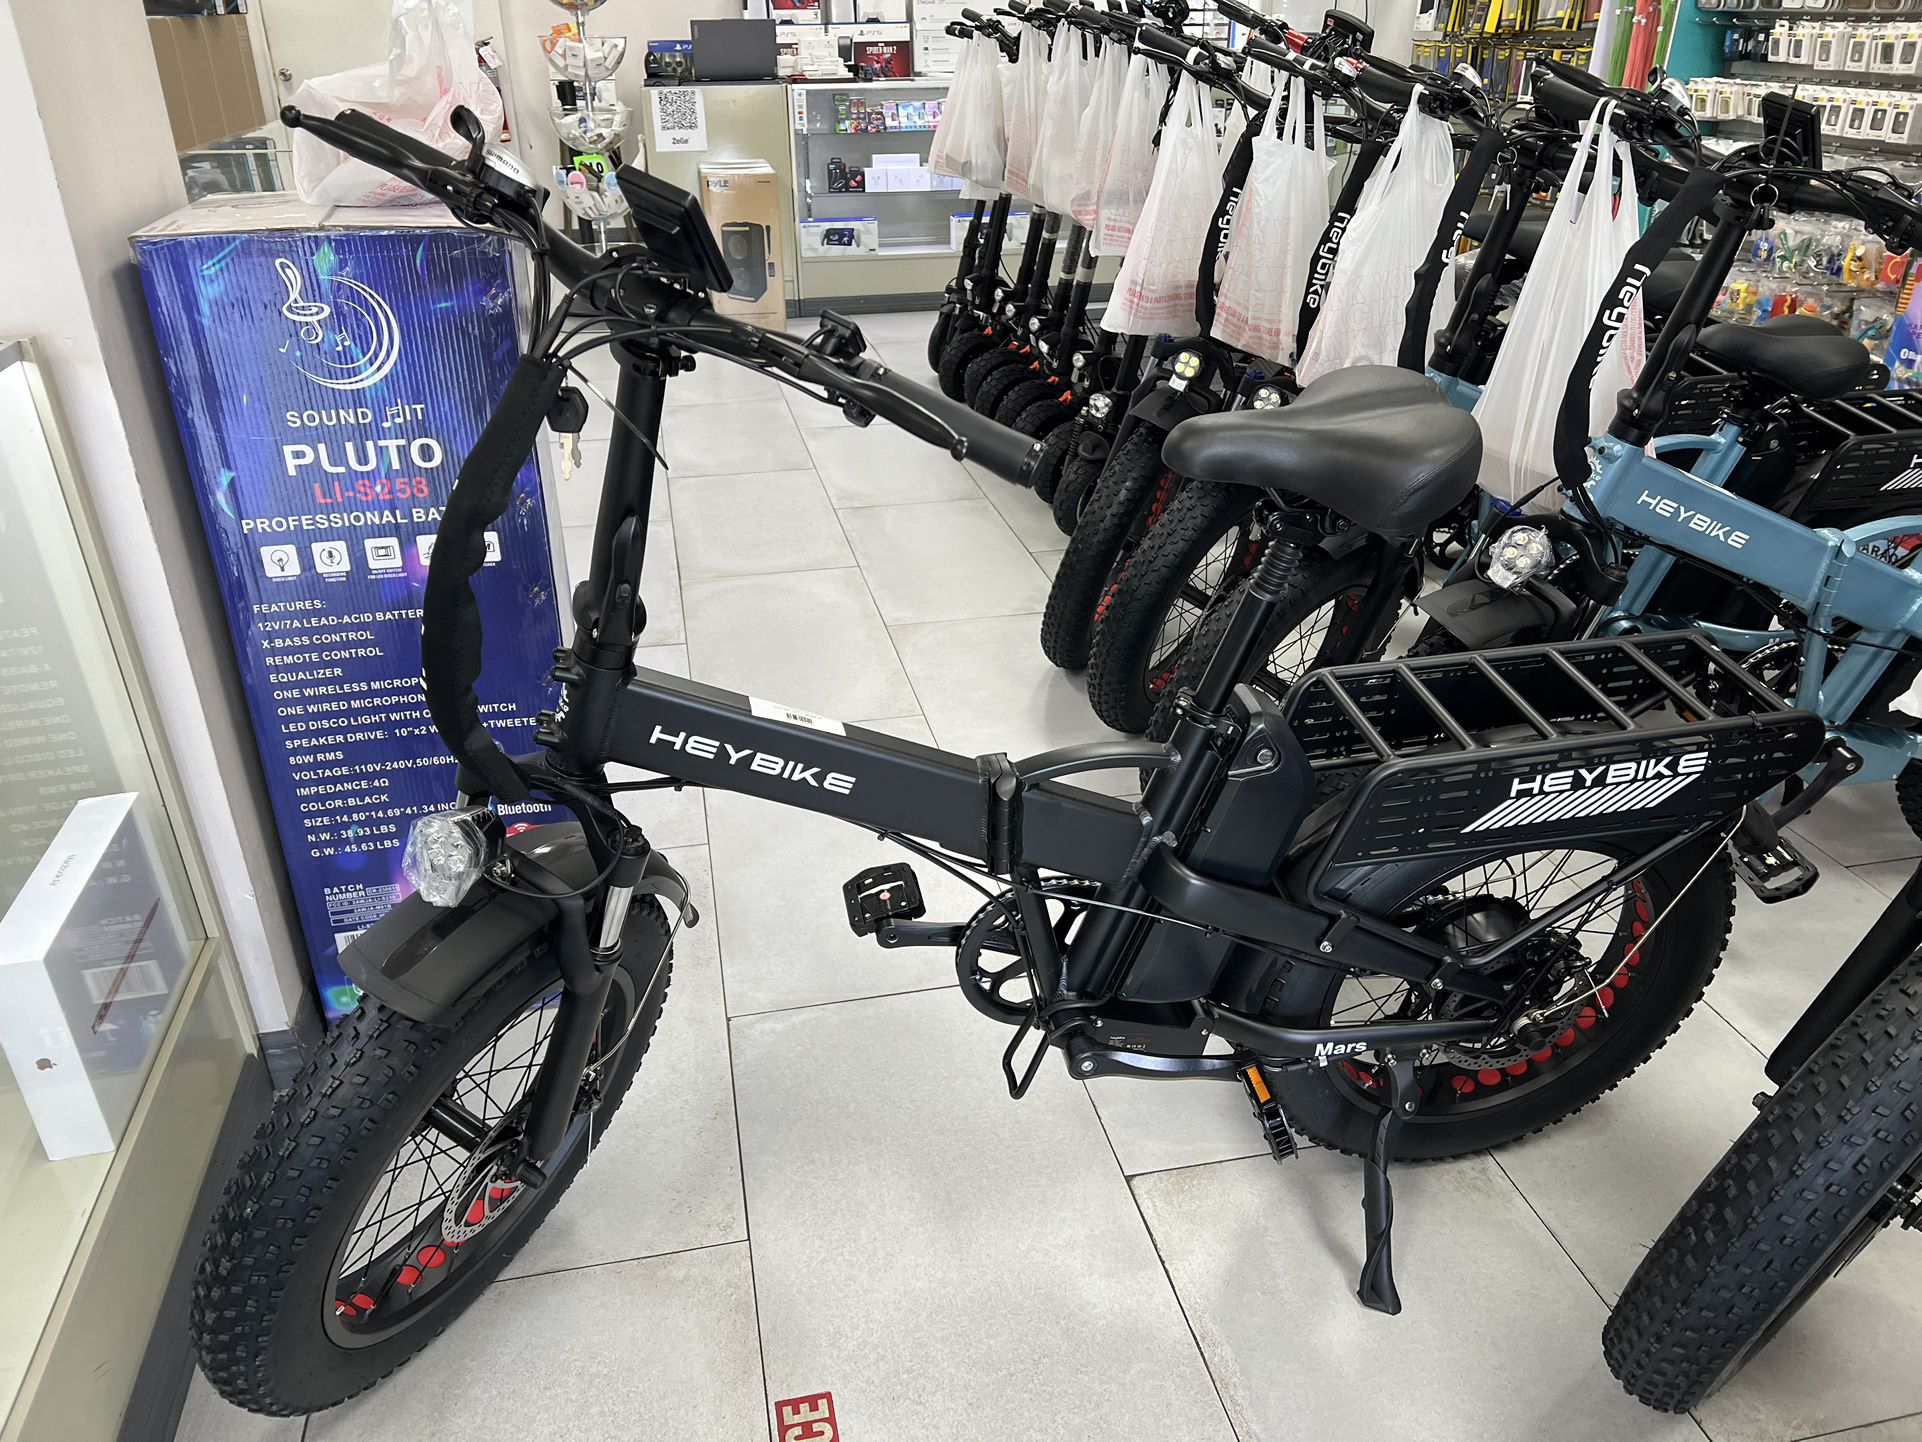 HeyBike Electric Bicycle 750watts! Finance For $50 Down Payment!!